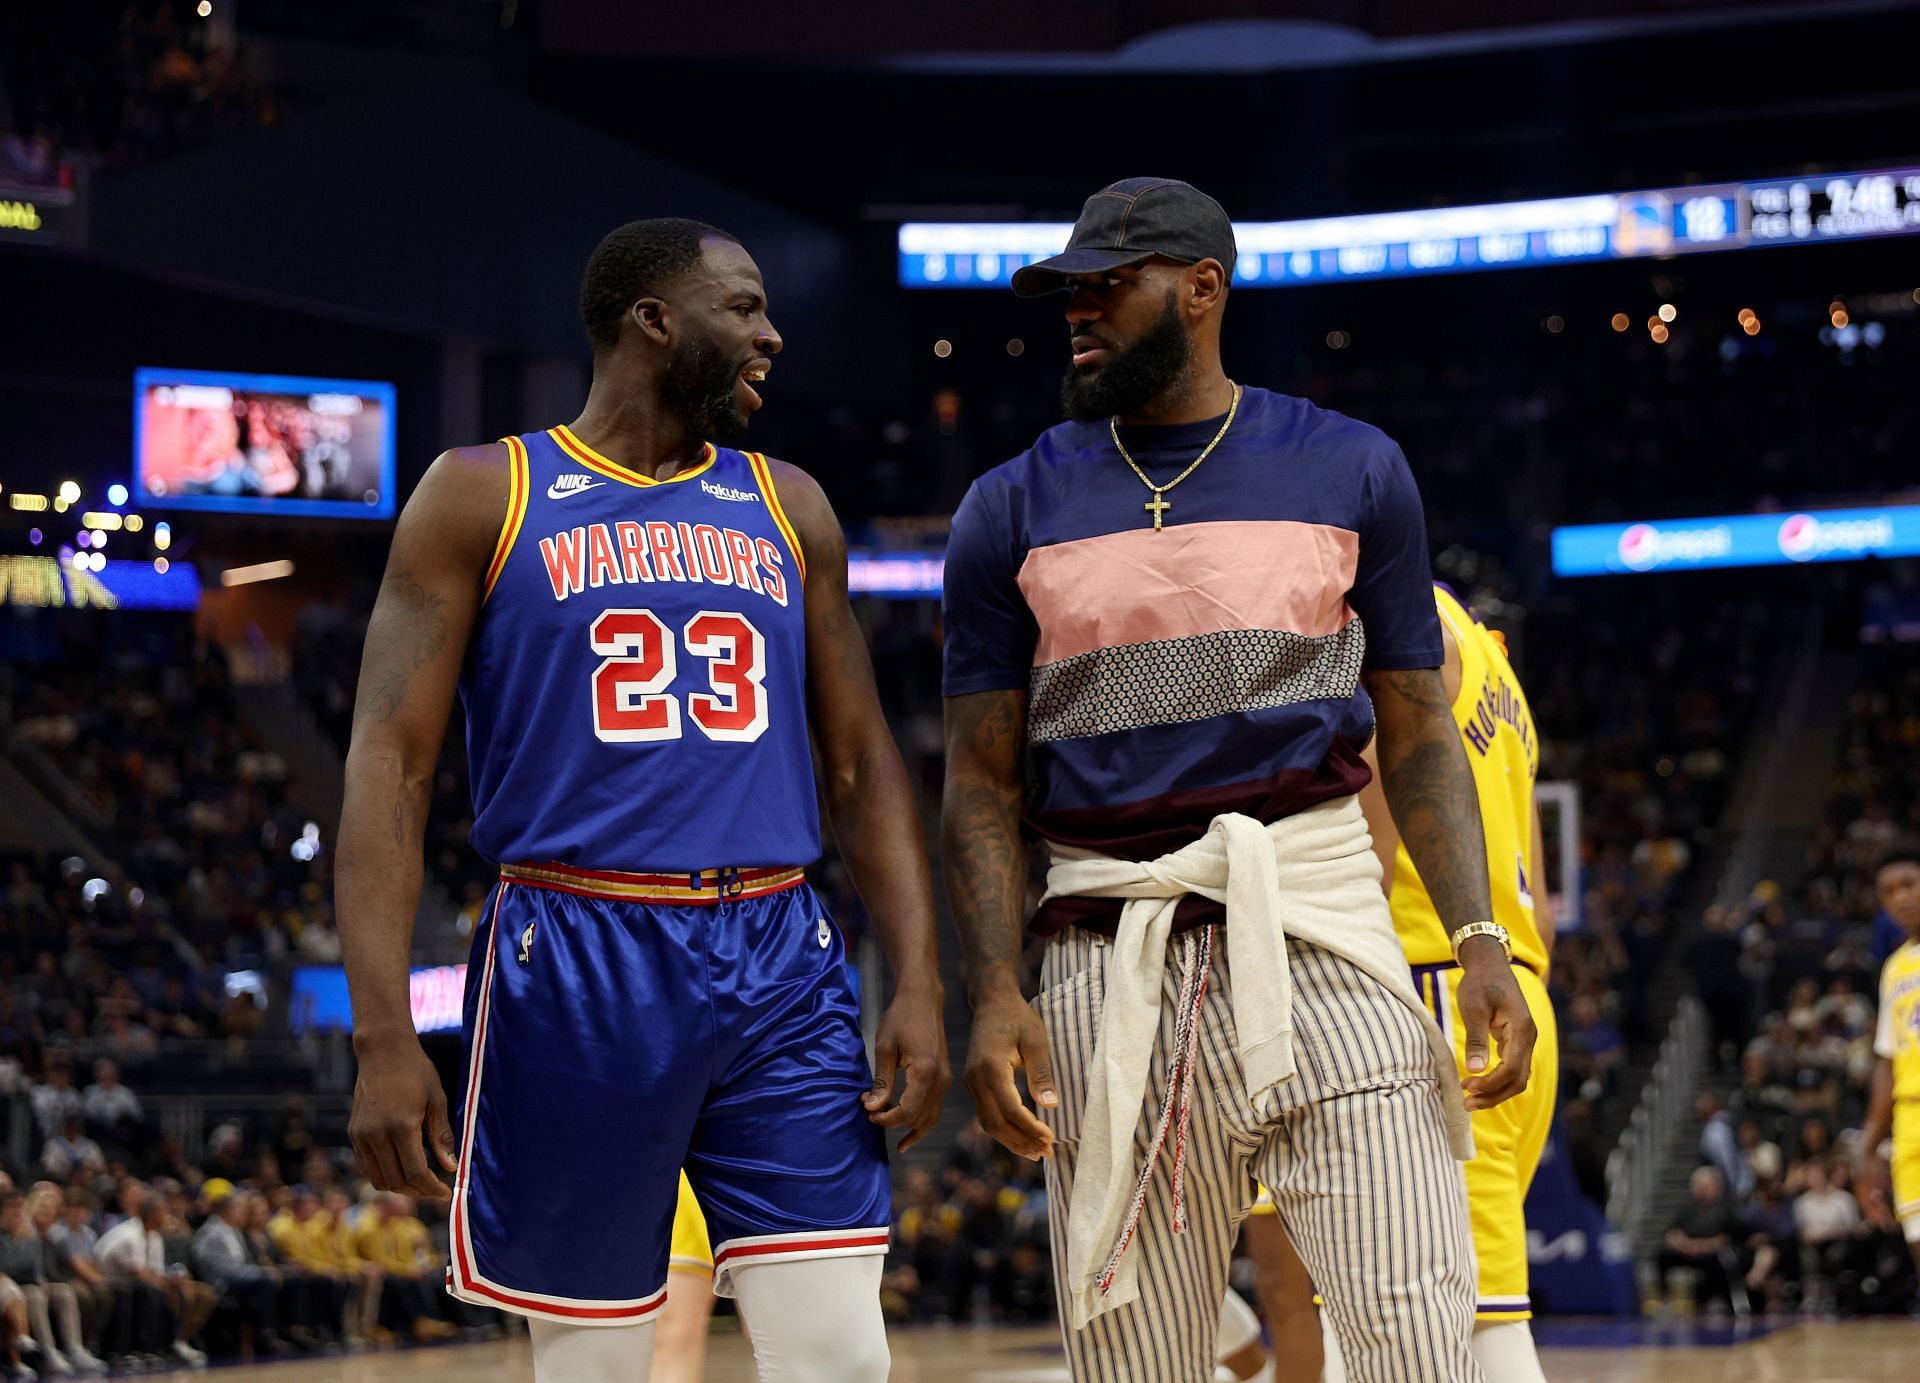 Golden State Warriors All-Star forward Draymond Green speaking with LA Lakers superstar forward LeBron James